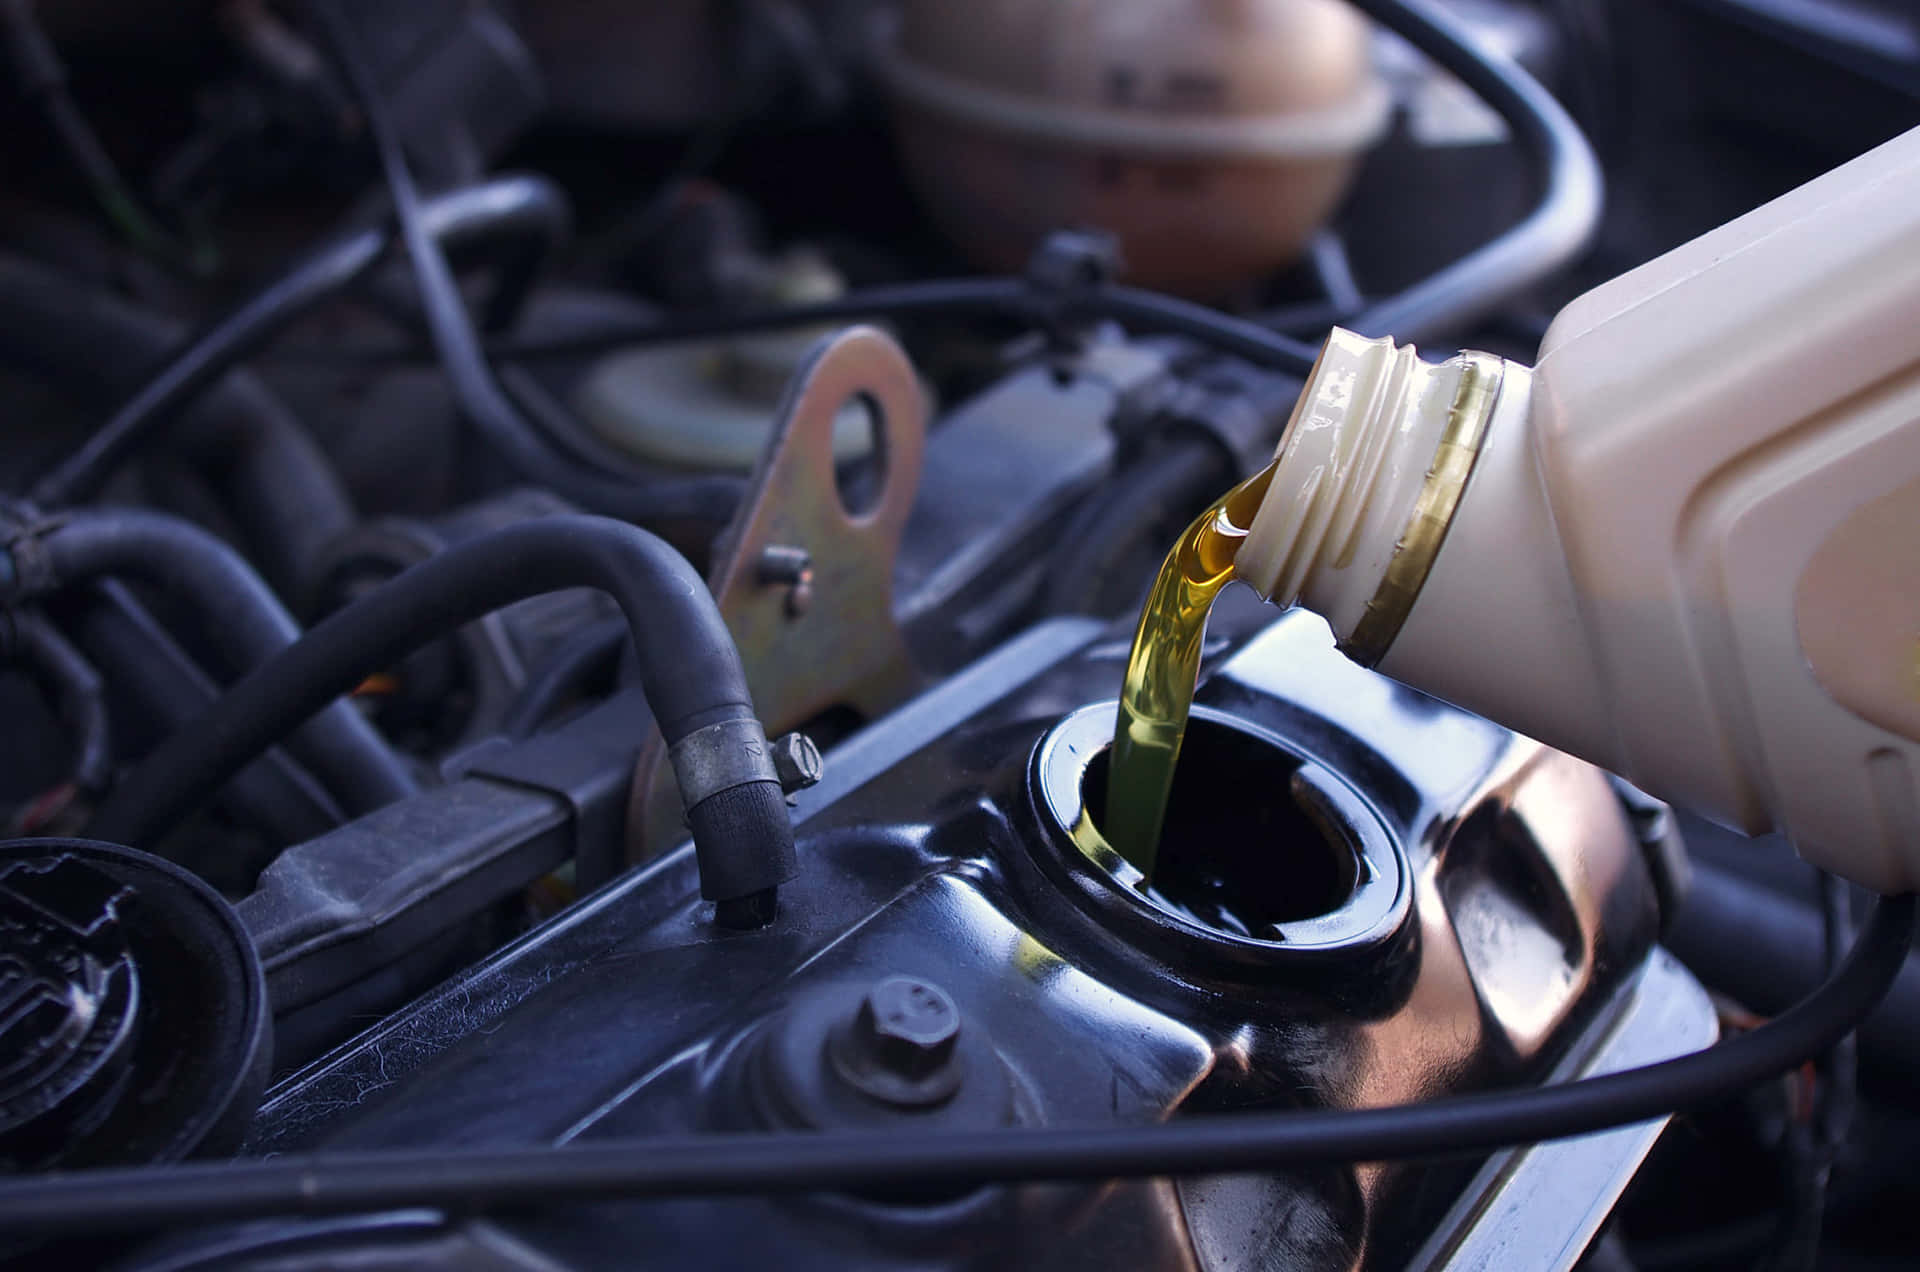 Regular oil changes are important for the long life of your car engine